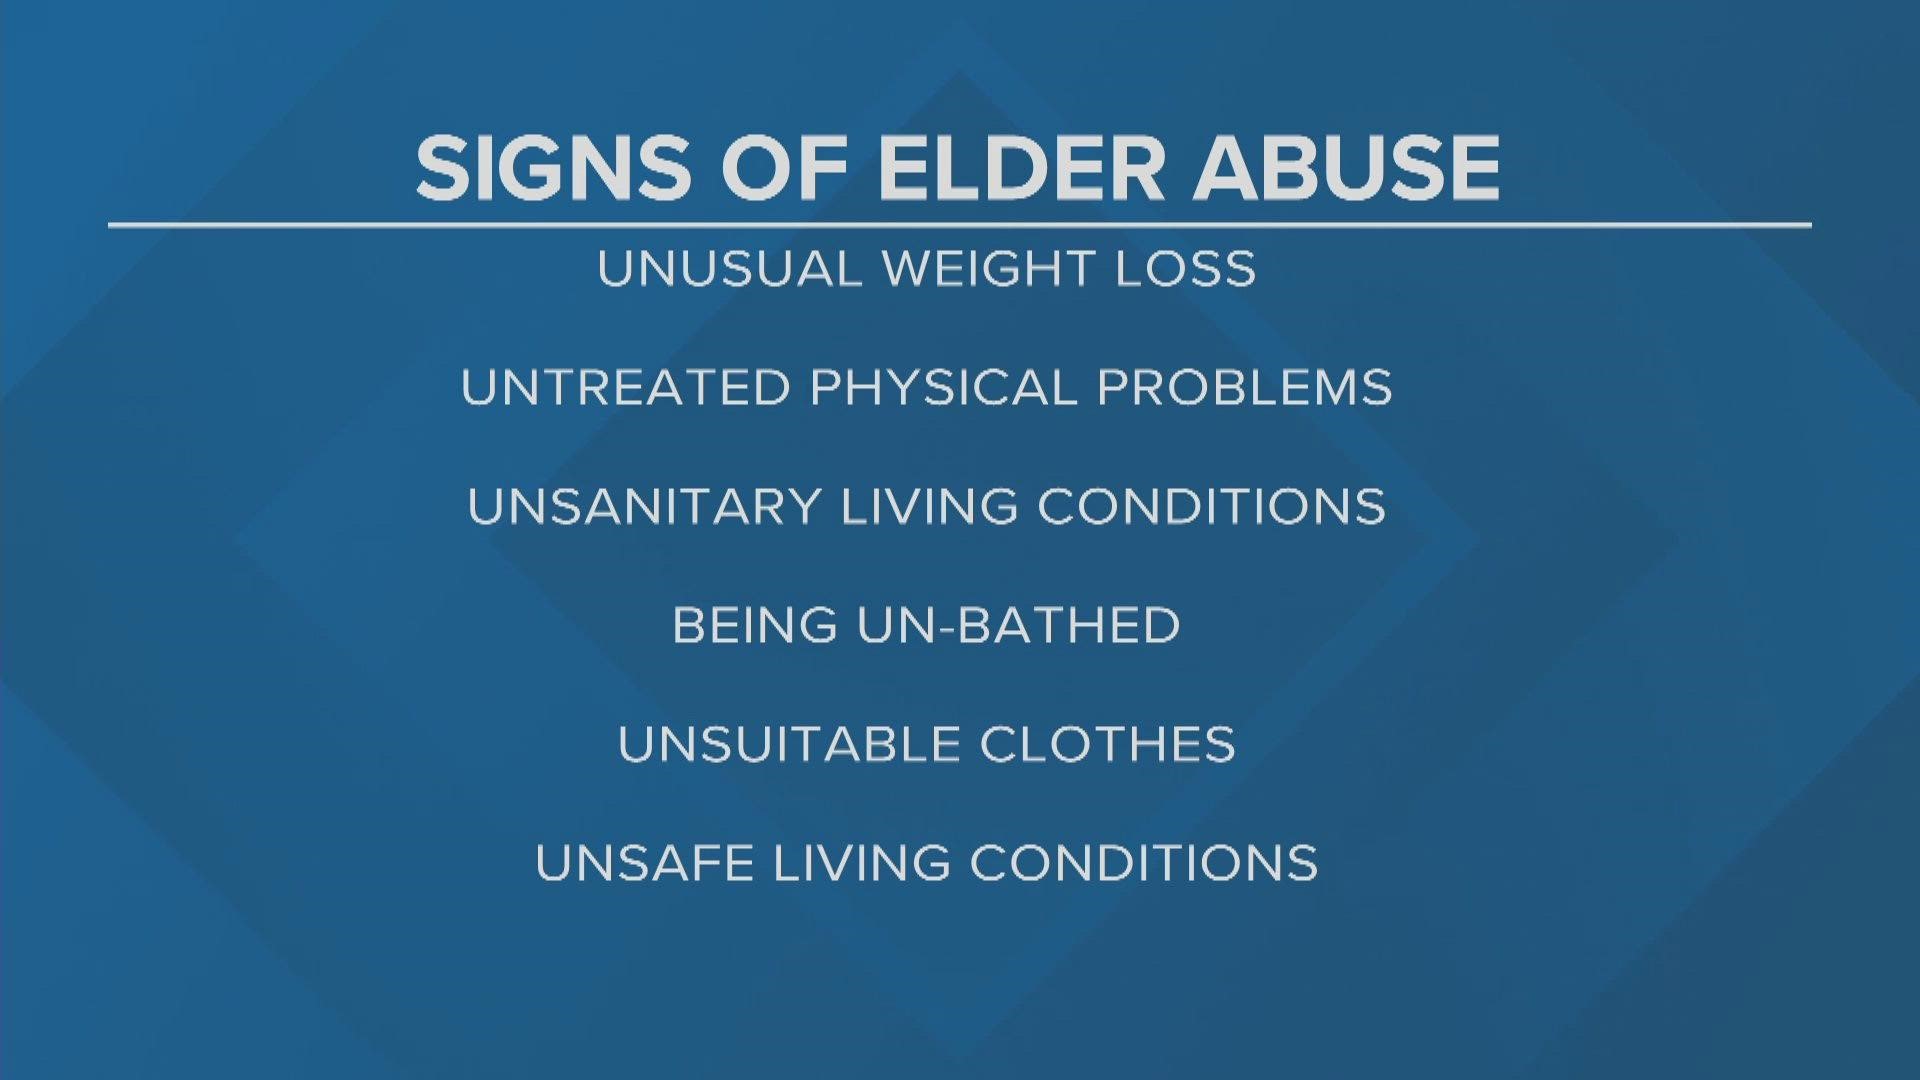 Wednesday marked World Elder Abuse Awareness Day. The District Attorney General's Office investigated more than 1,300 cases of elder abuse last year.